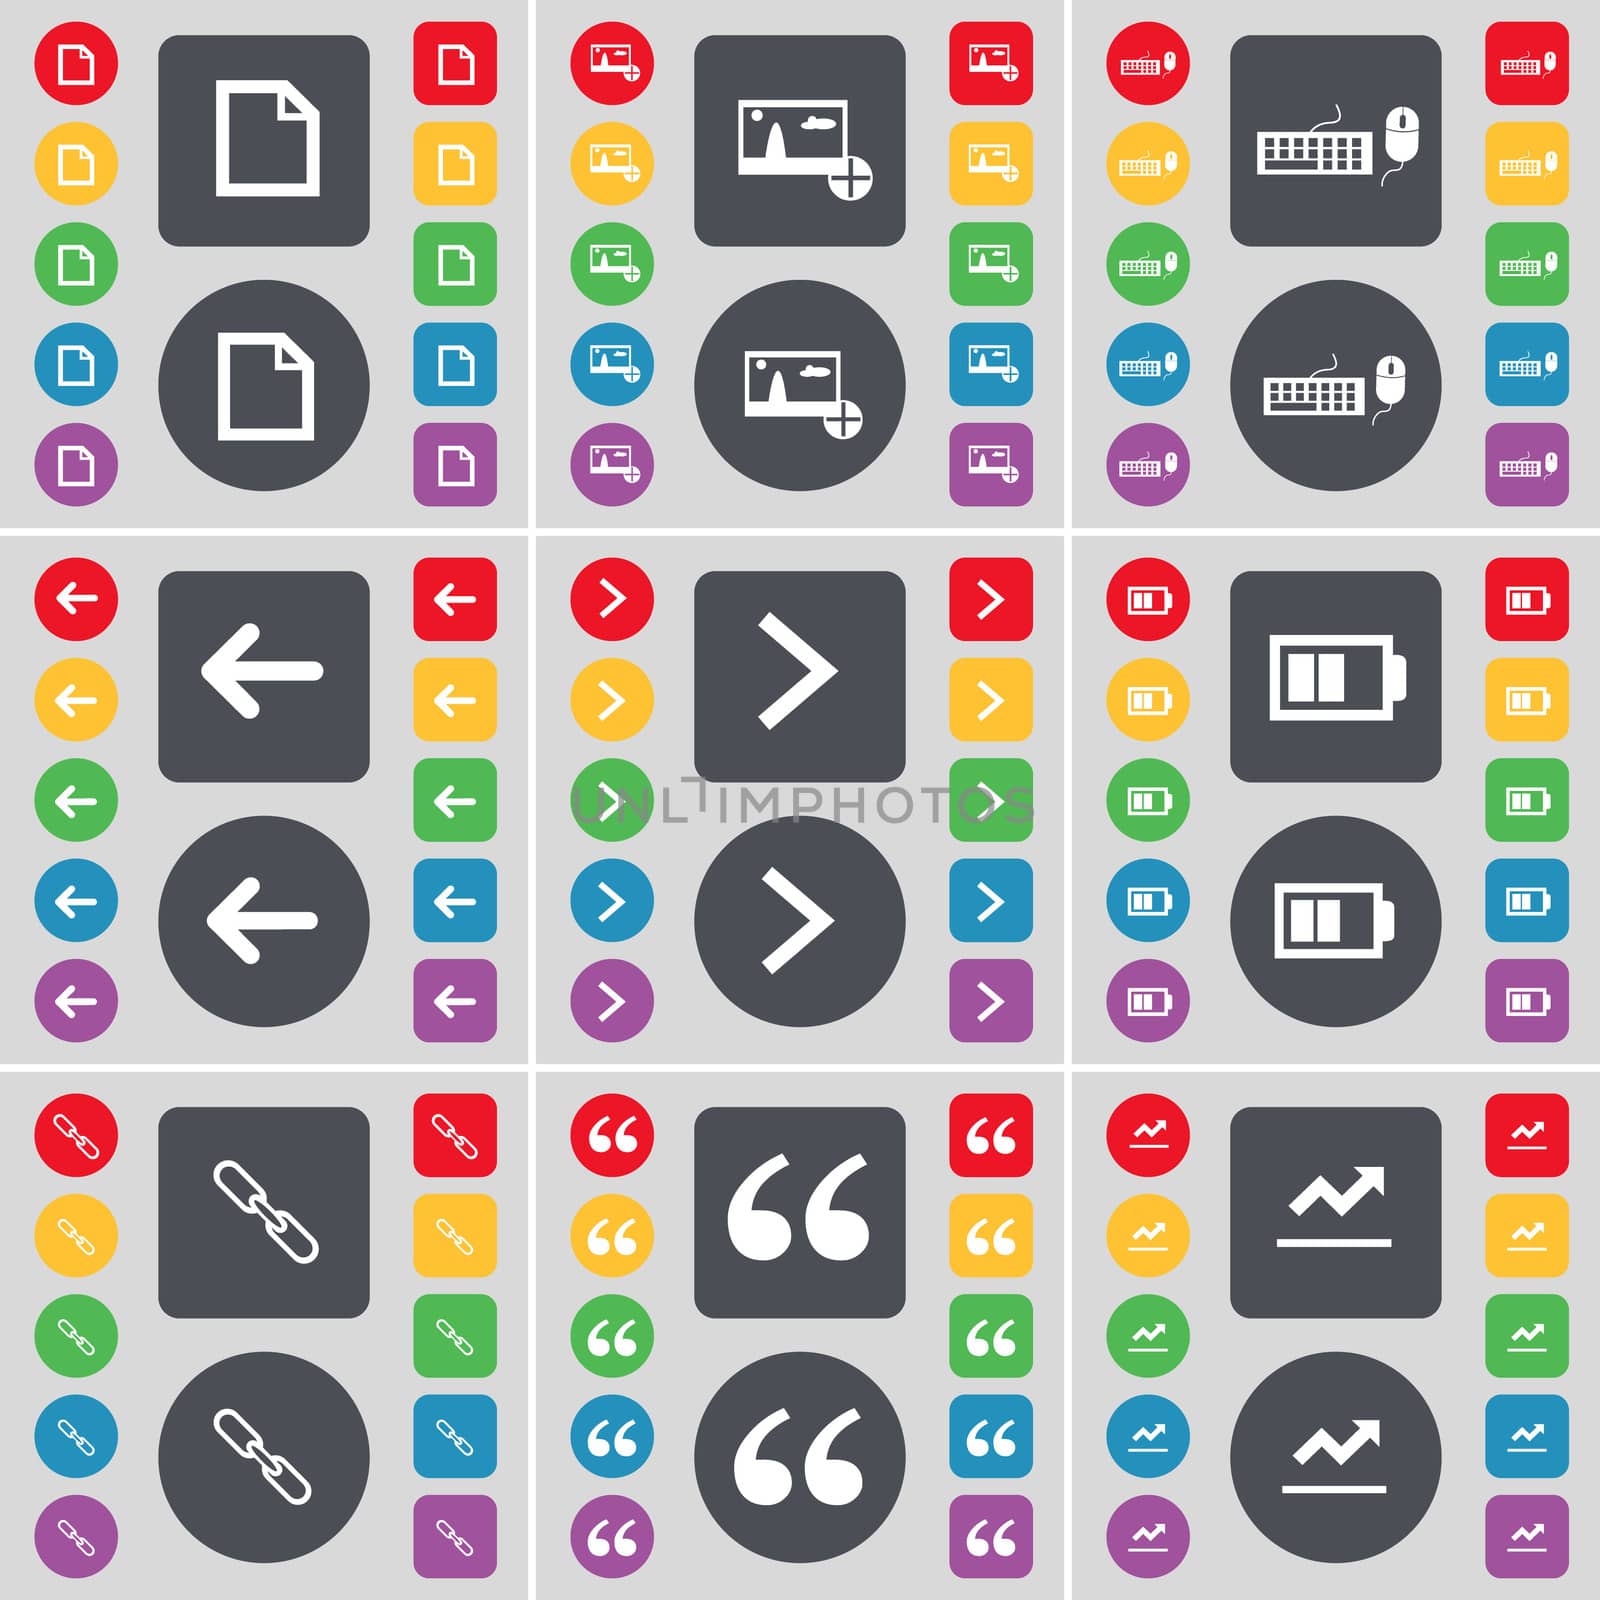 File, Picture, Keyboard, Arrow left, Arrow right, Battery, Link, Quotation mark, Graph icon symbol. A large set of flat, colored buttons for your design. illustration